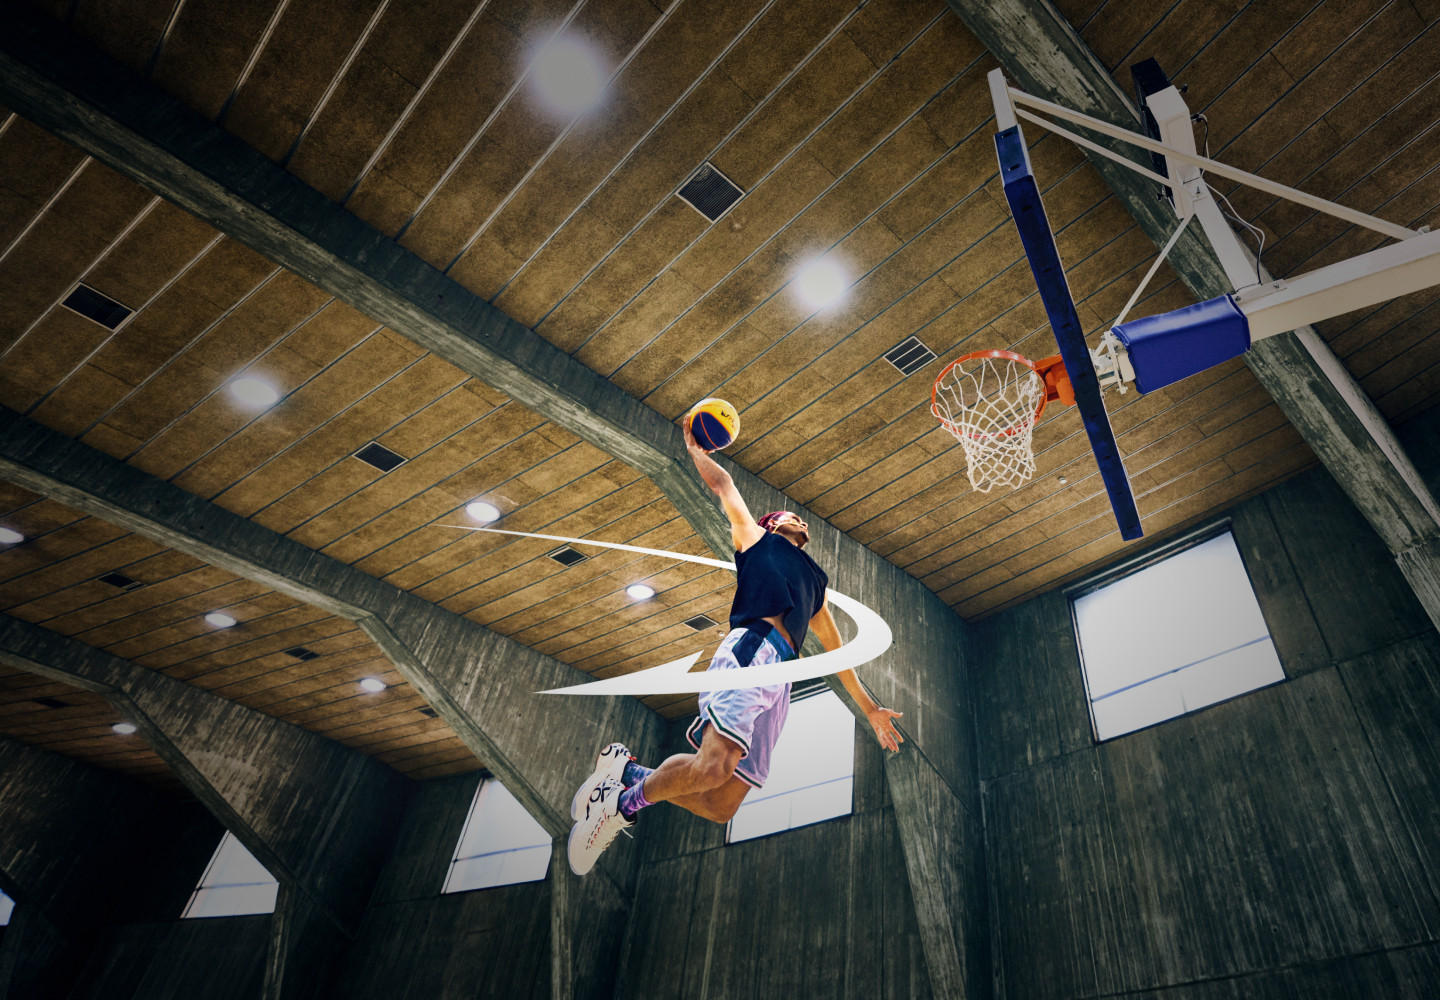 man about to dunk basketball into hoop with ON orbit around body